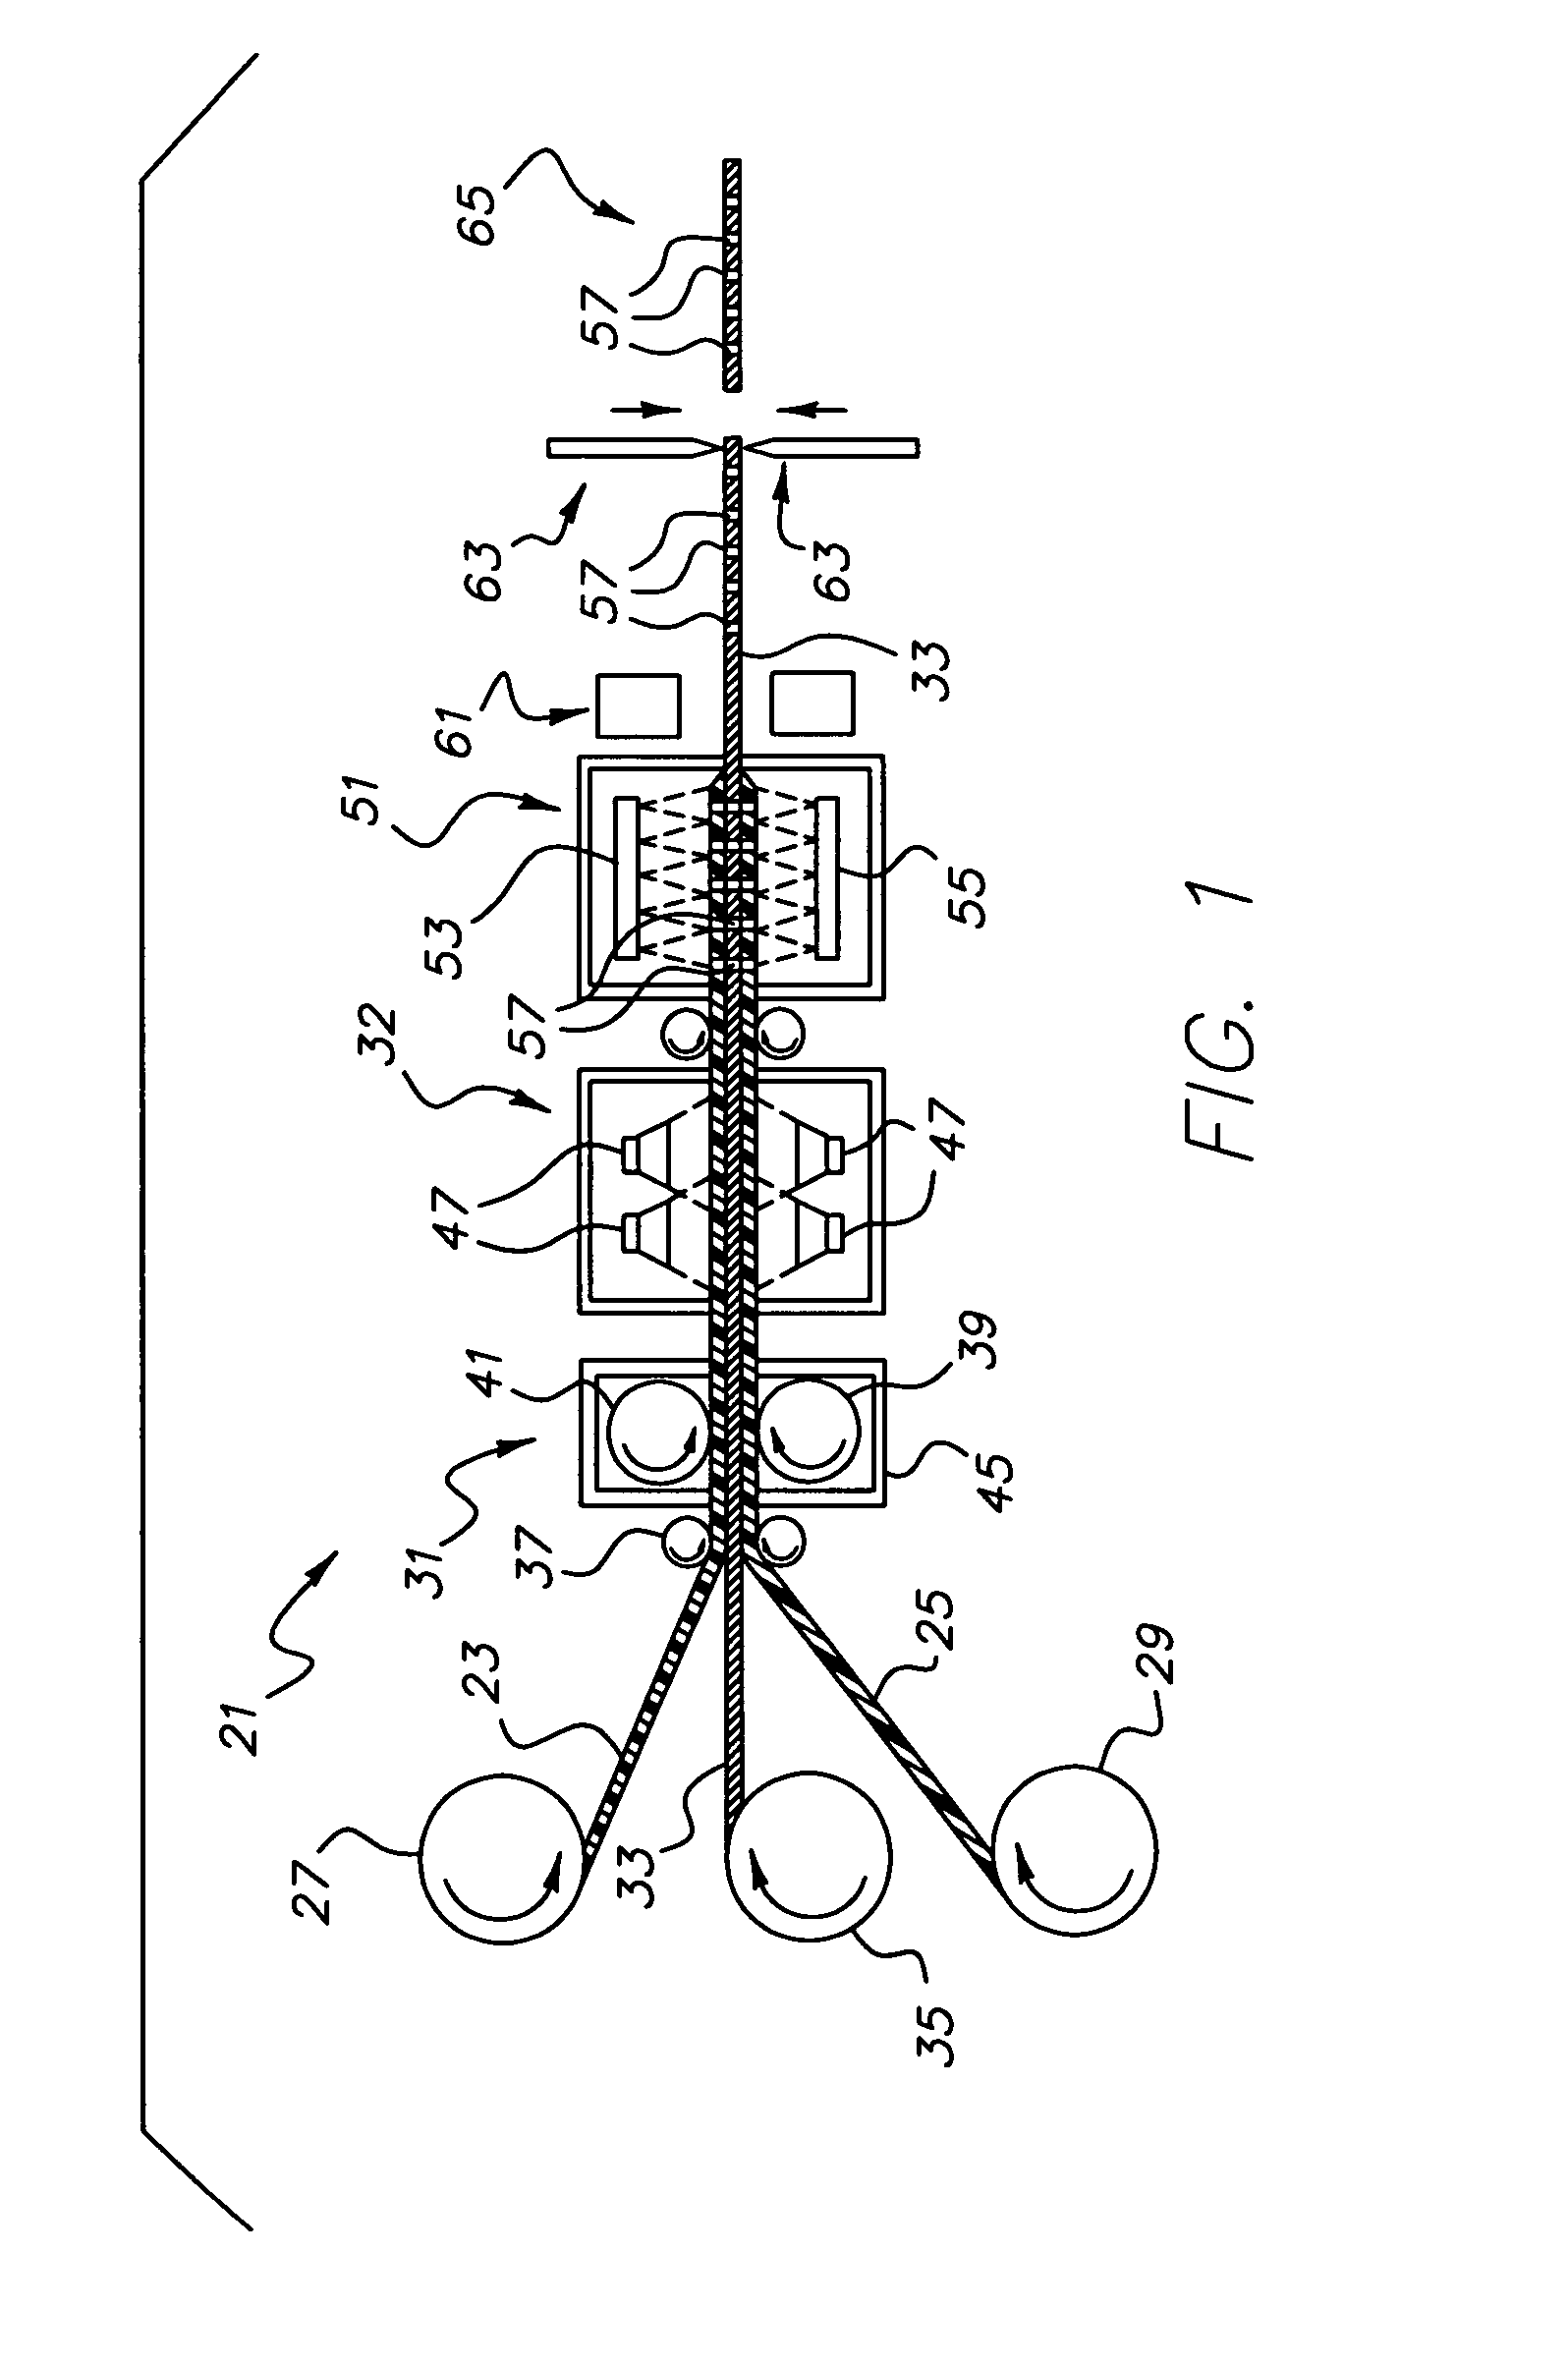 Method for making a multilayered circuitized substrate